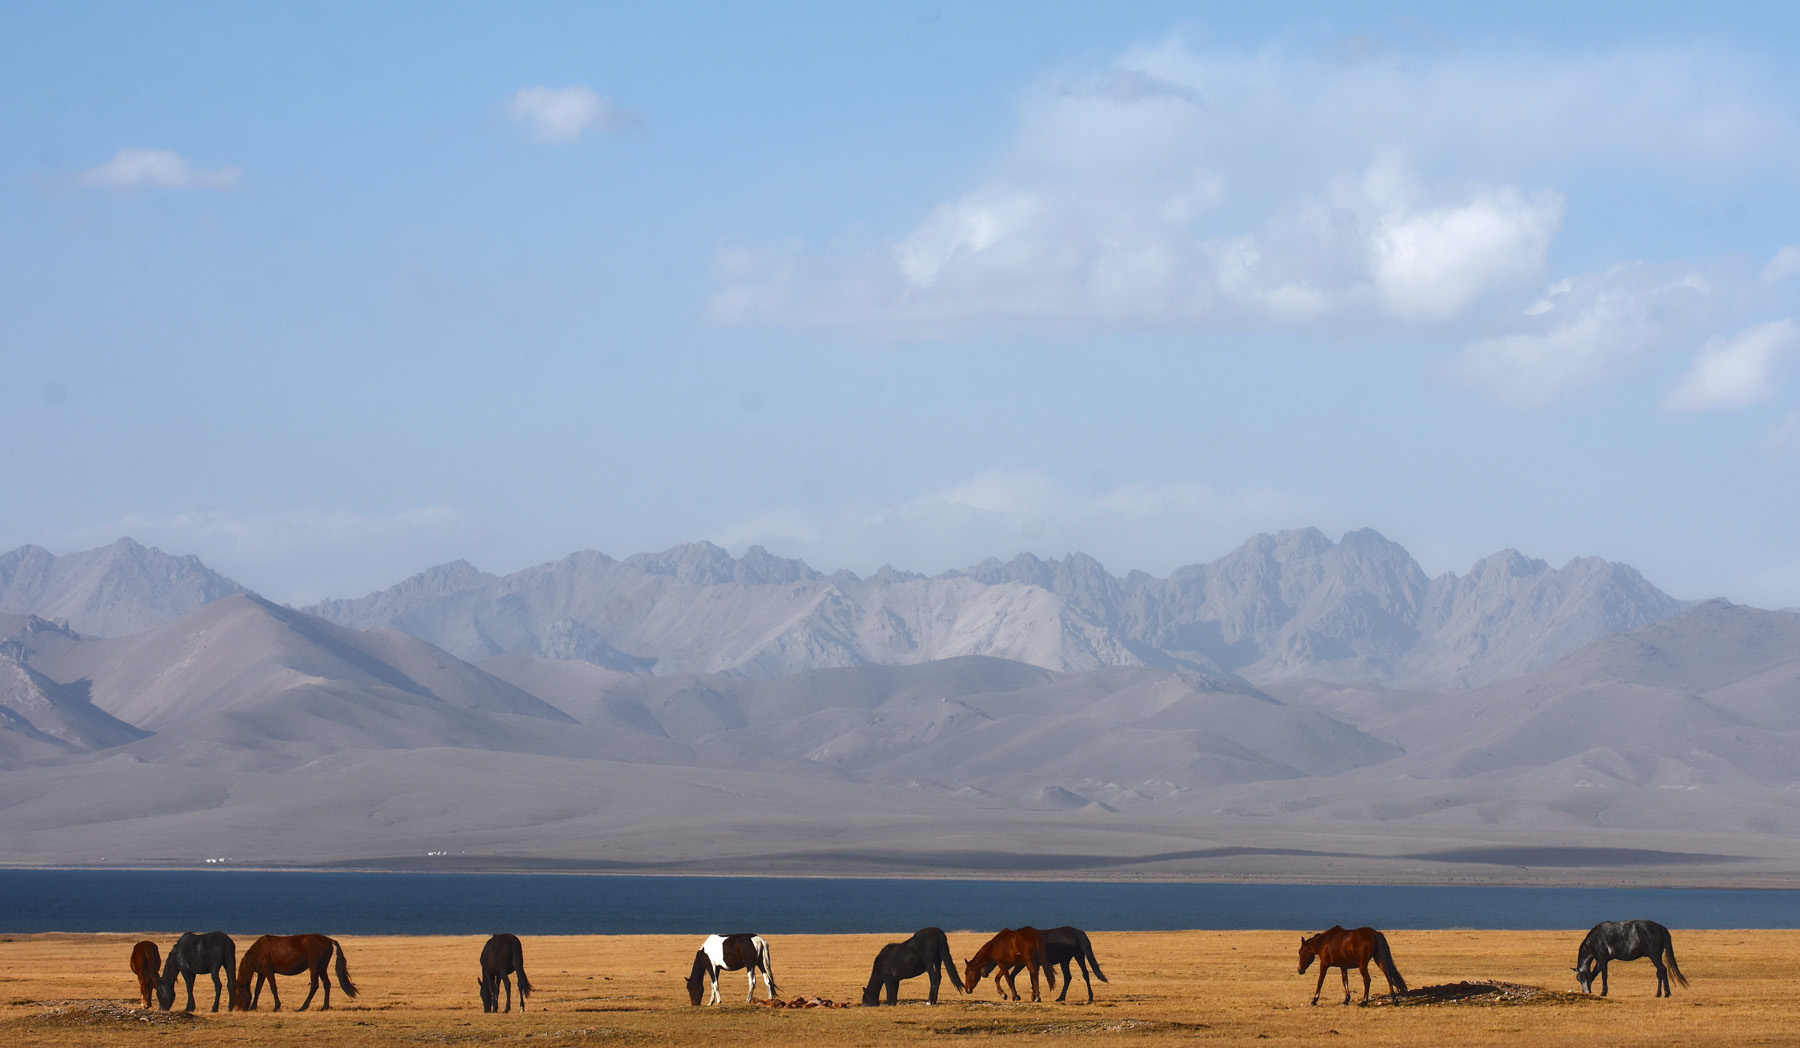 The wonderful landscape of Song-Kol in the northern Naryn province of Kyrgyzstan, where a few horses still roam free with the Issyk-Kul lake in the background.  